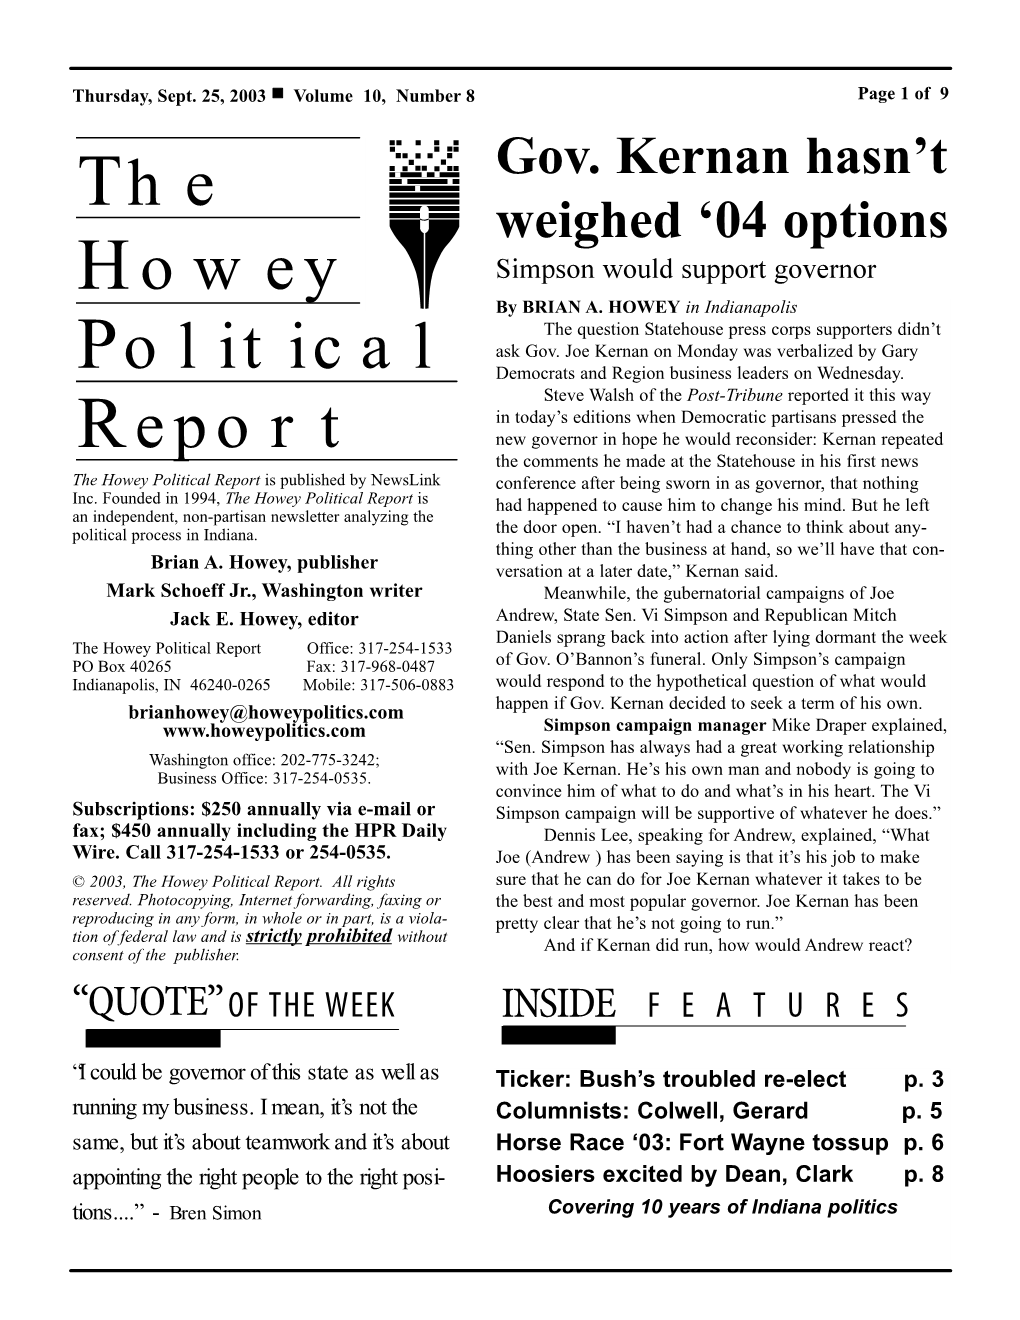 The Howey Political Report Is Published by Newslink Conference After Being Sworn in As Governor, That Nothing Inc